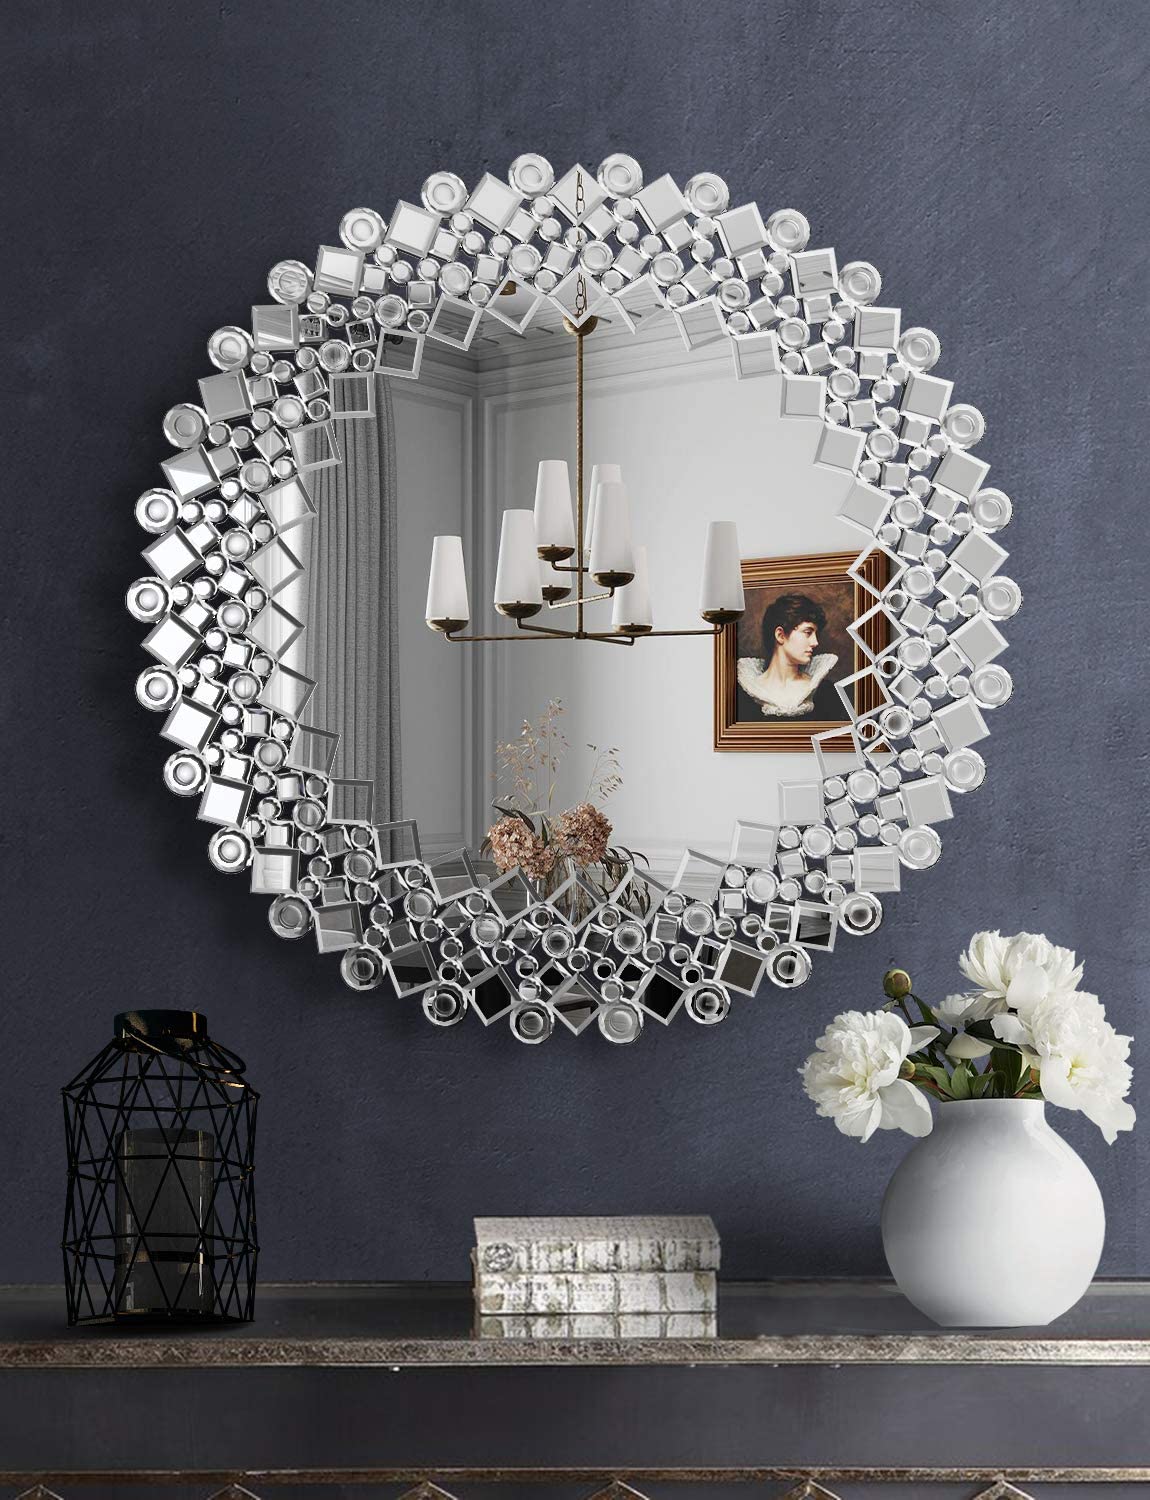 Pep Up Your Home with Mirror Decorating Ideas - Choose various kinds of